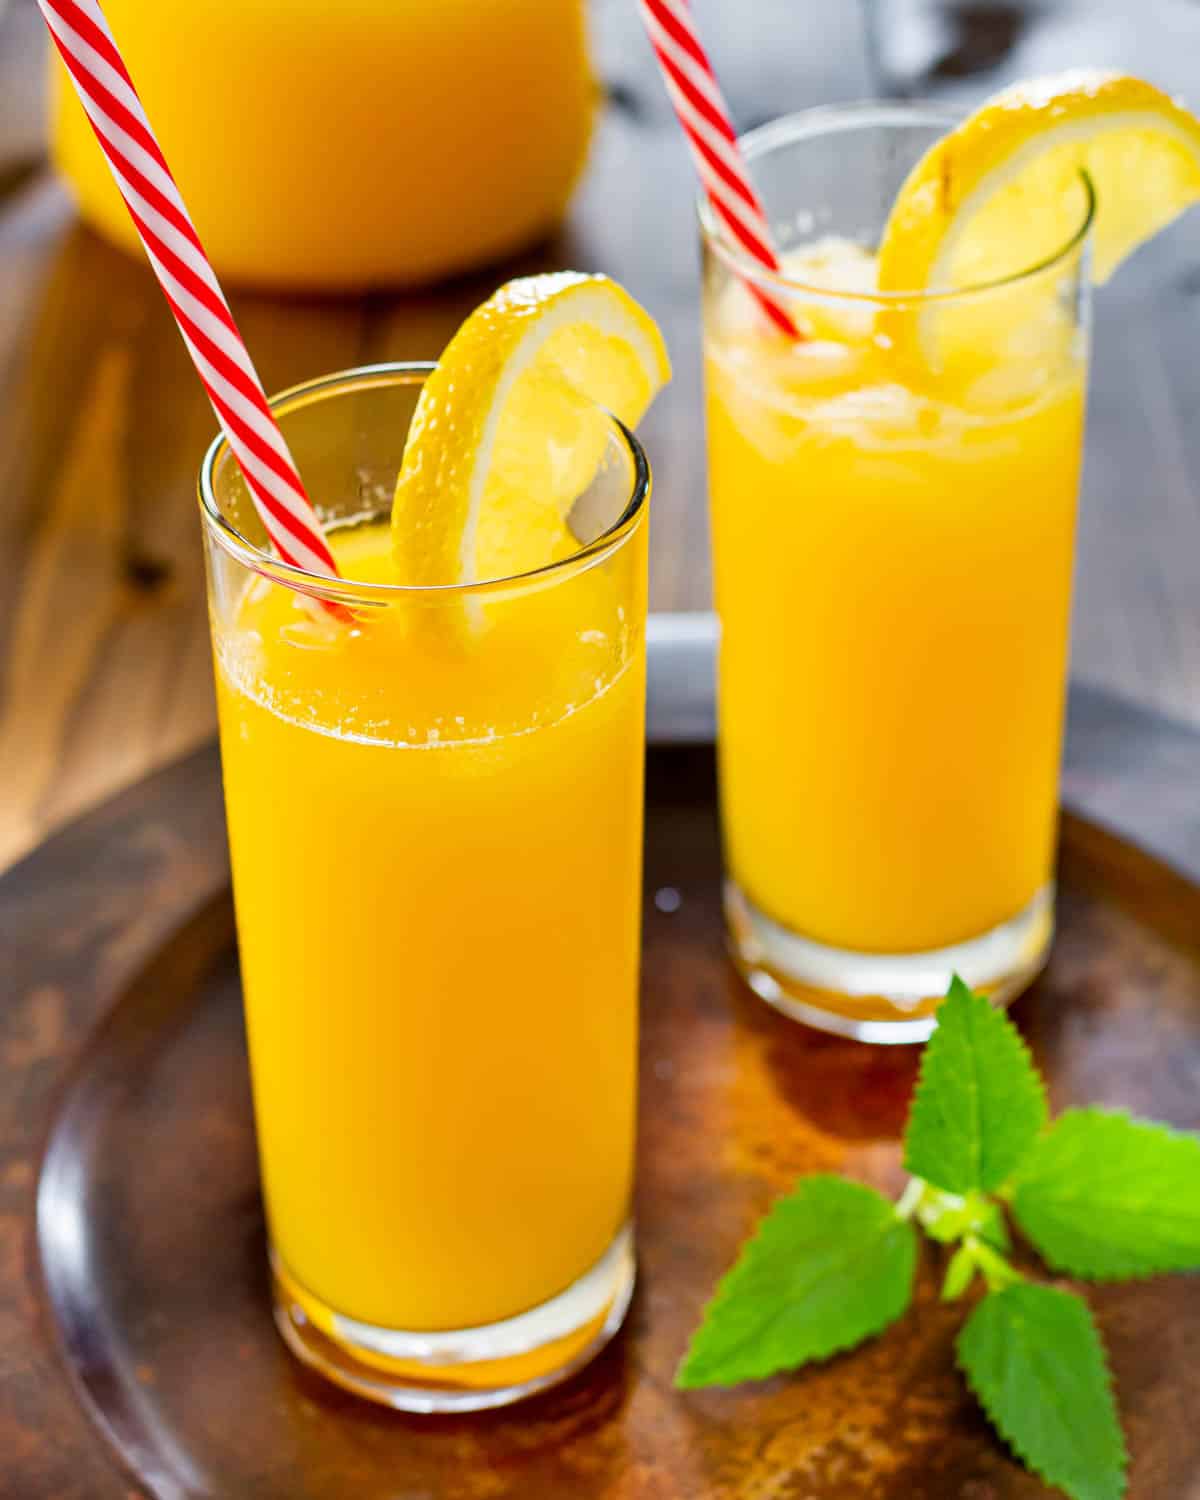 two glasses filled with mango lemonade garnished with a lemon slice and a straw in each glass